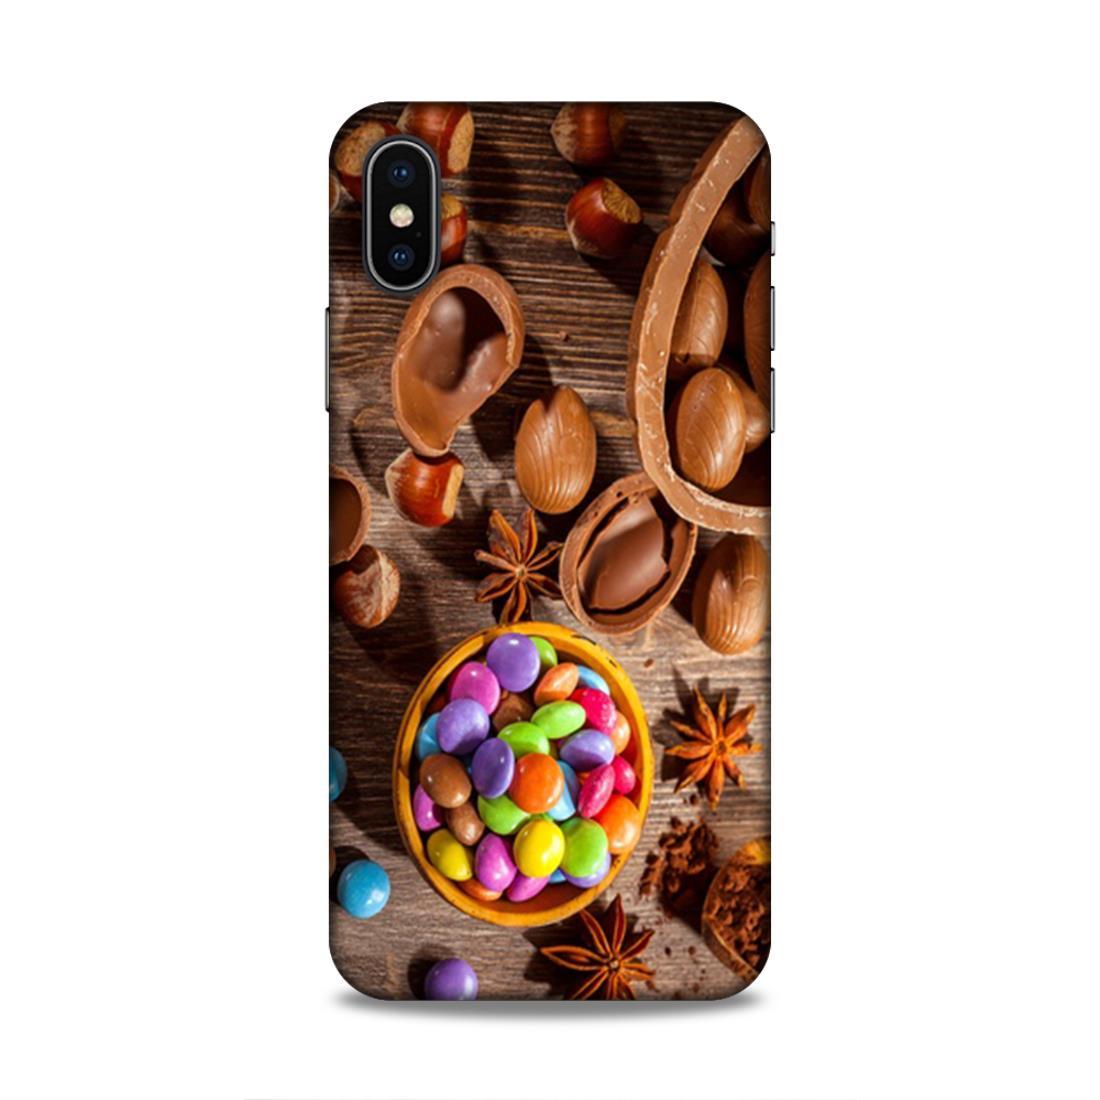 Chocolate Gems iPhone XS Mobile Cover